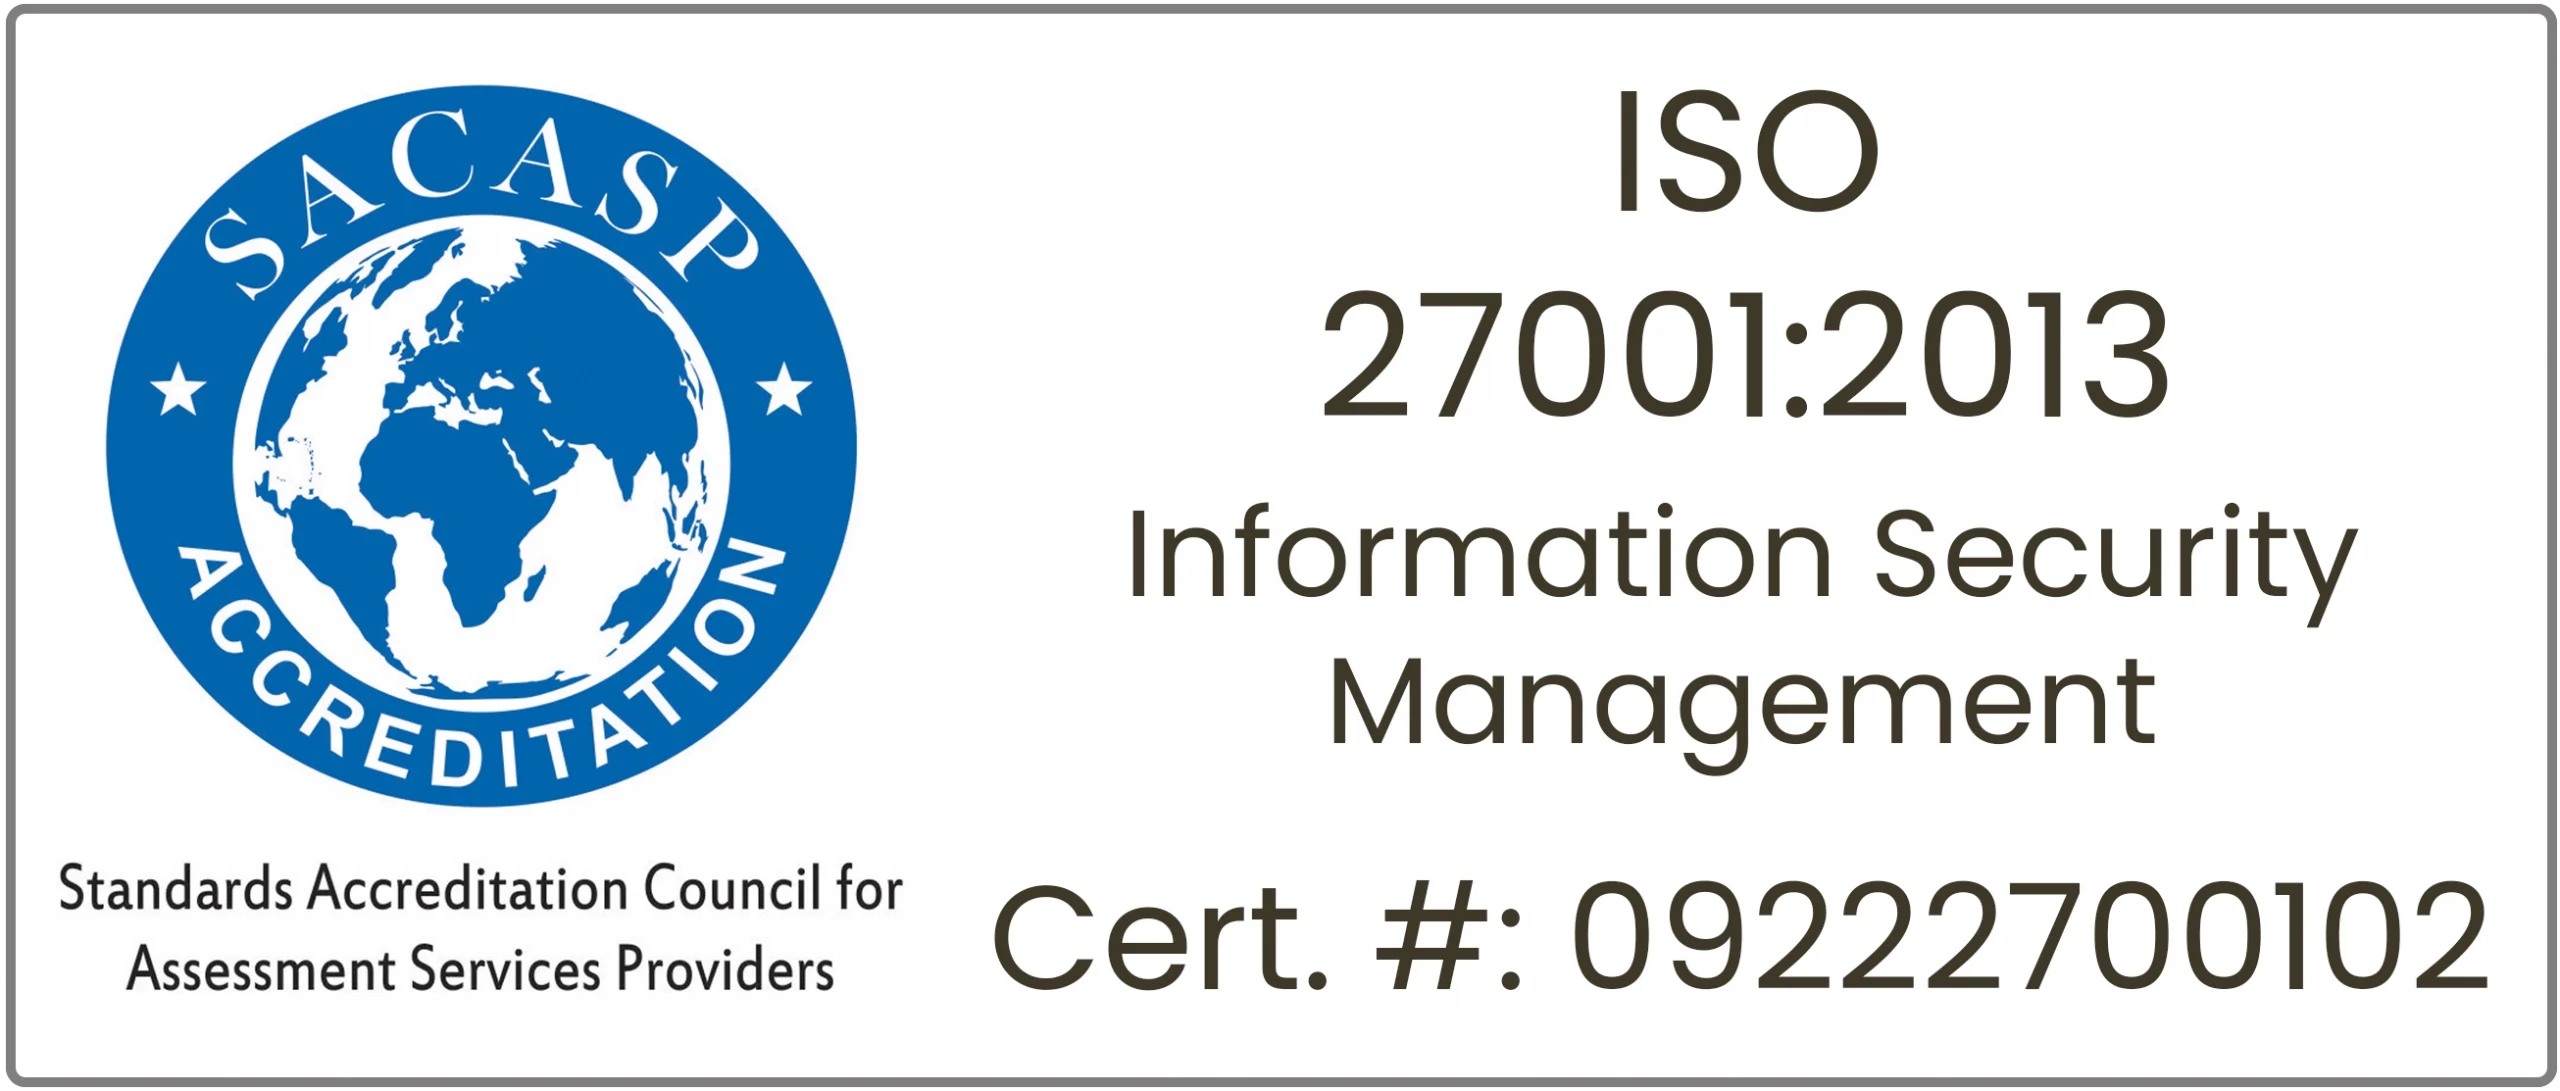 ISO/IEC 27001:2013 - Information Security Management